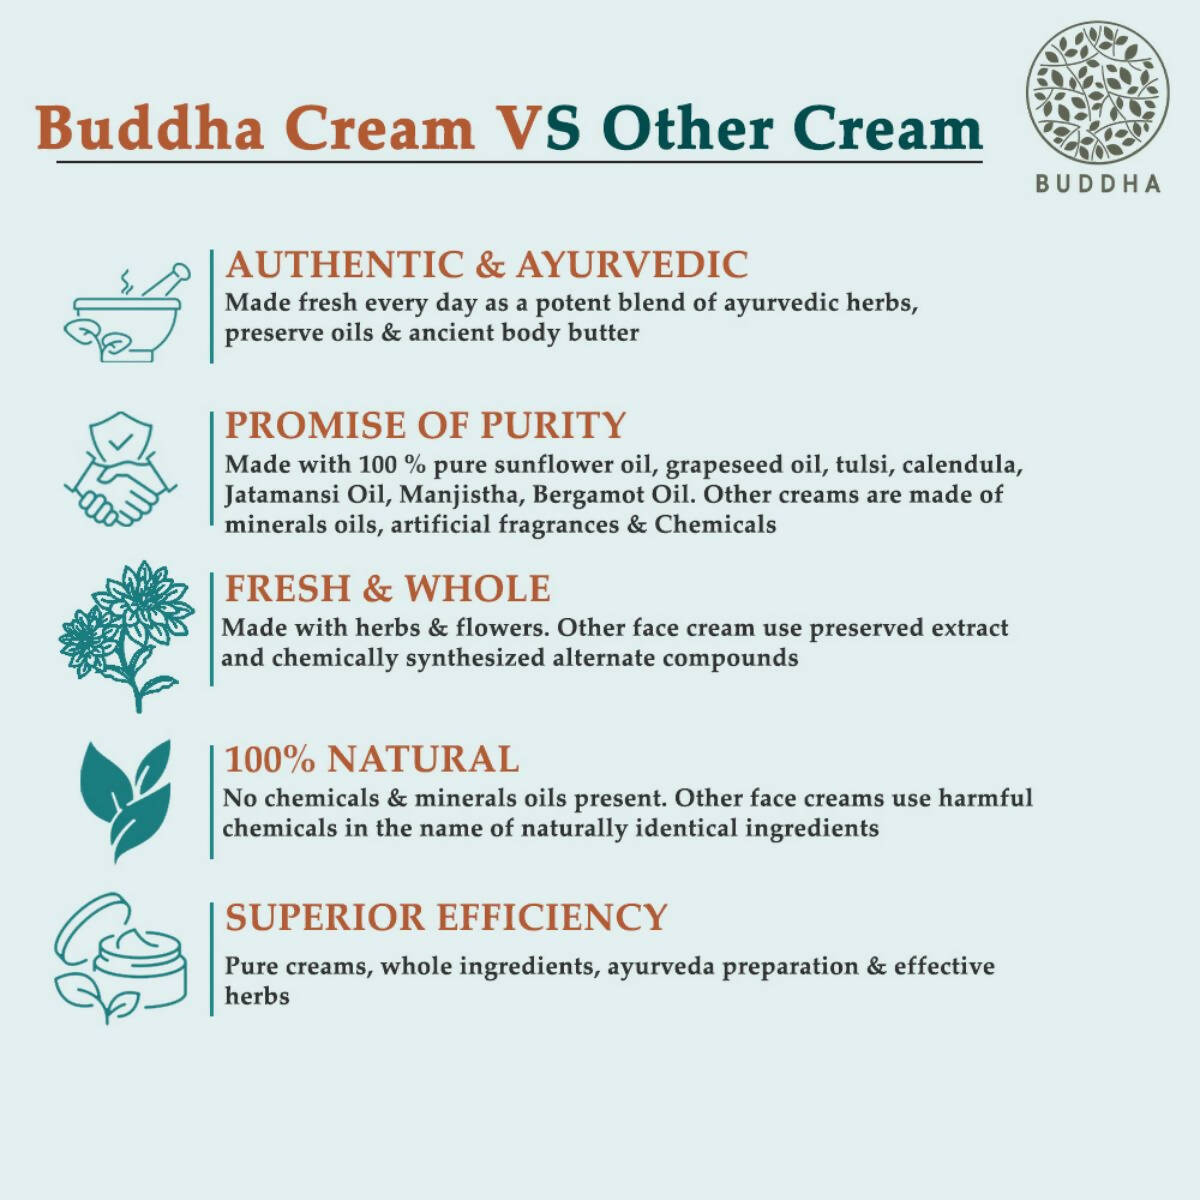 Buddha Natural Neck Whitening Cream - Help With Dark Spots, Age Spots In The Neck Area